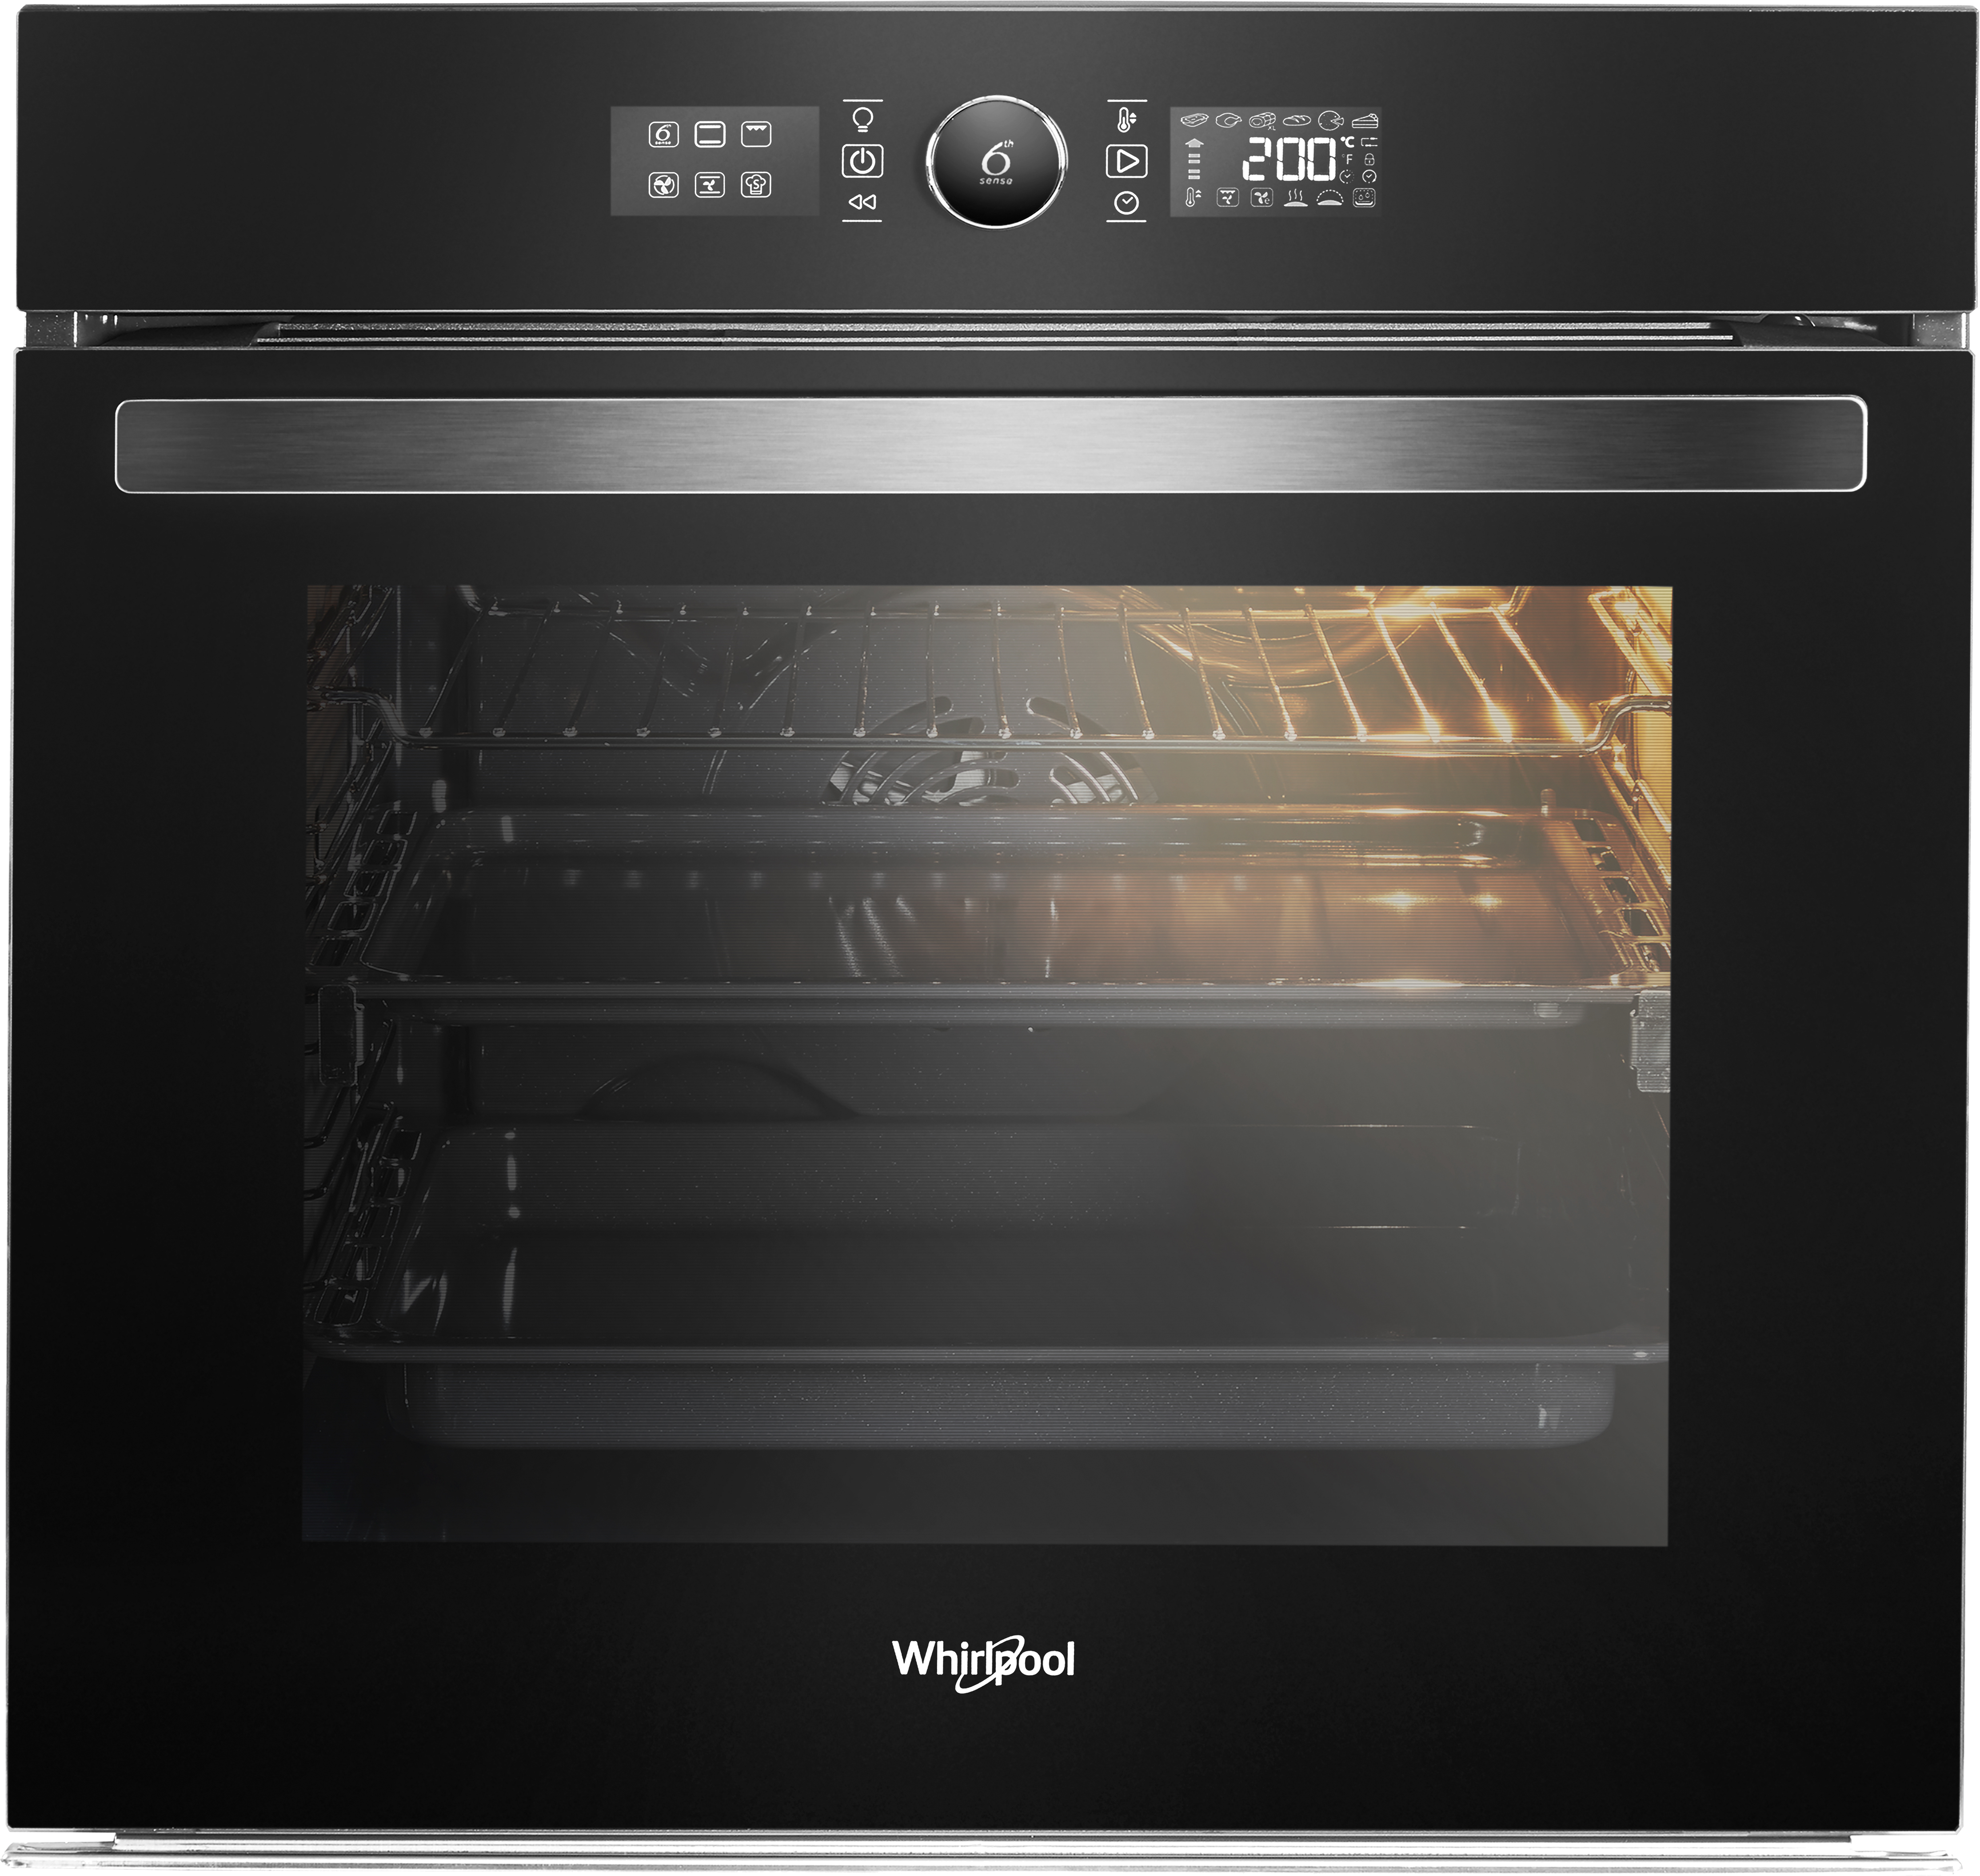 Whirlpool Absolute AKZ96230NB Built In Electric Single Oven - Black - A+ Rated, Black